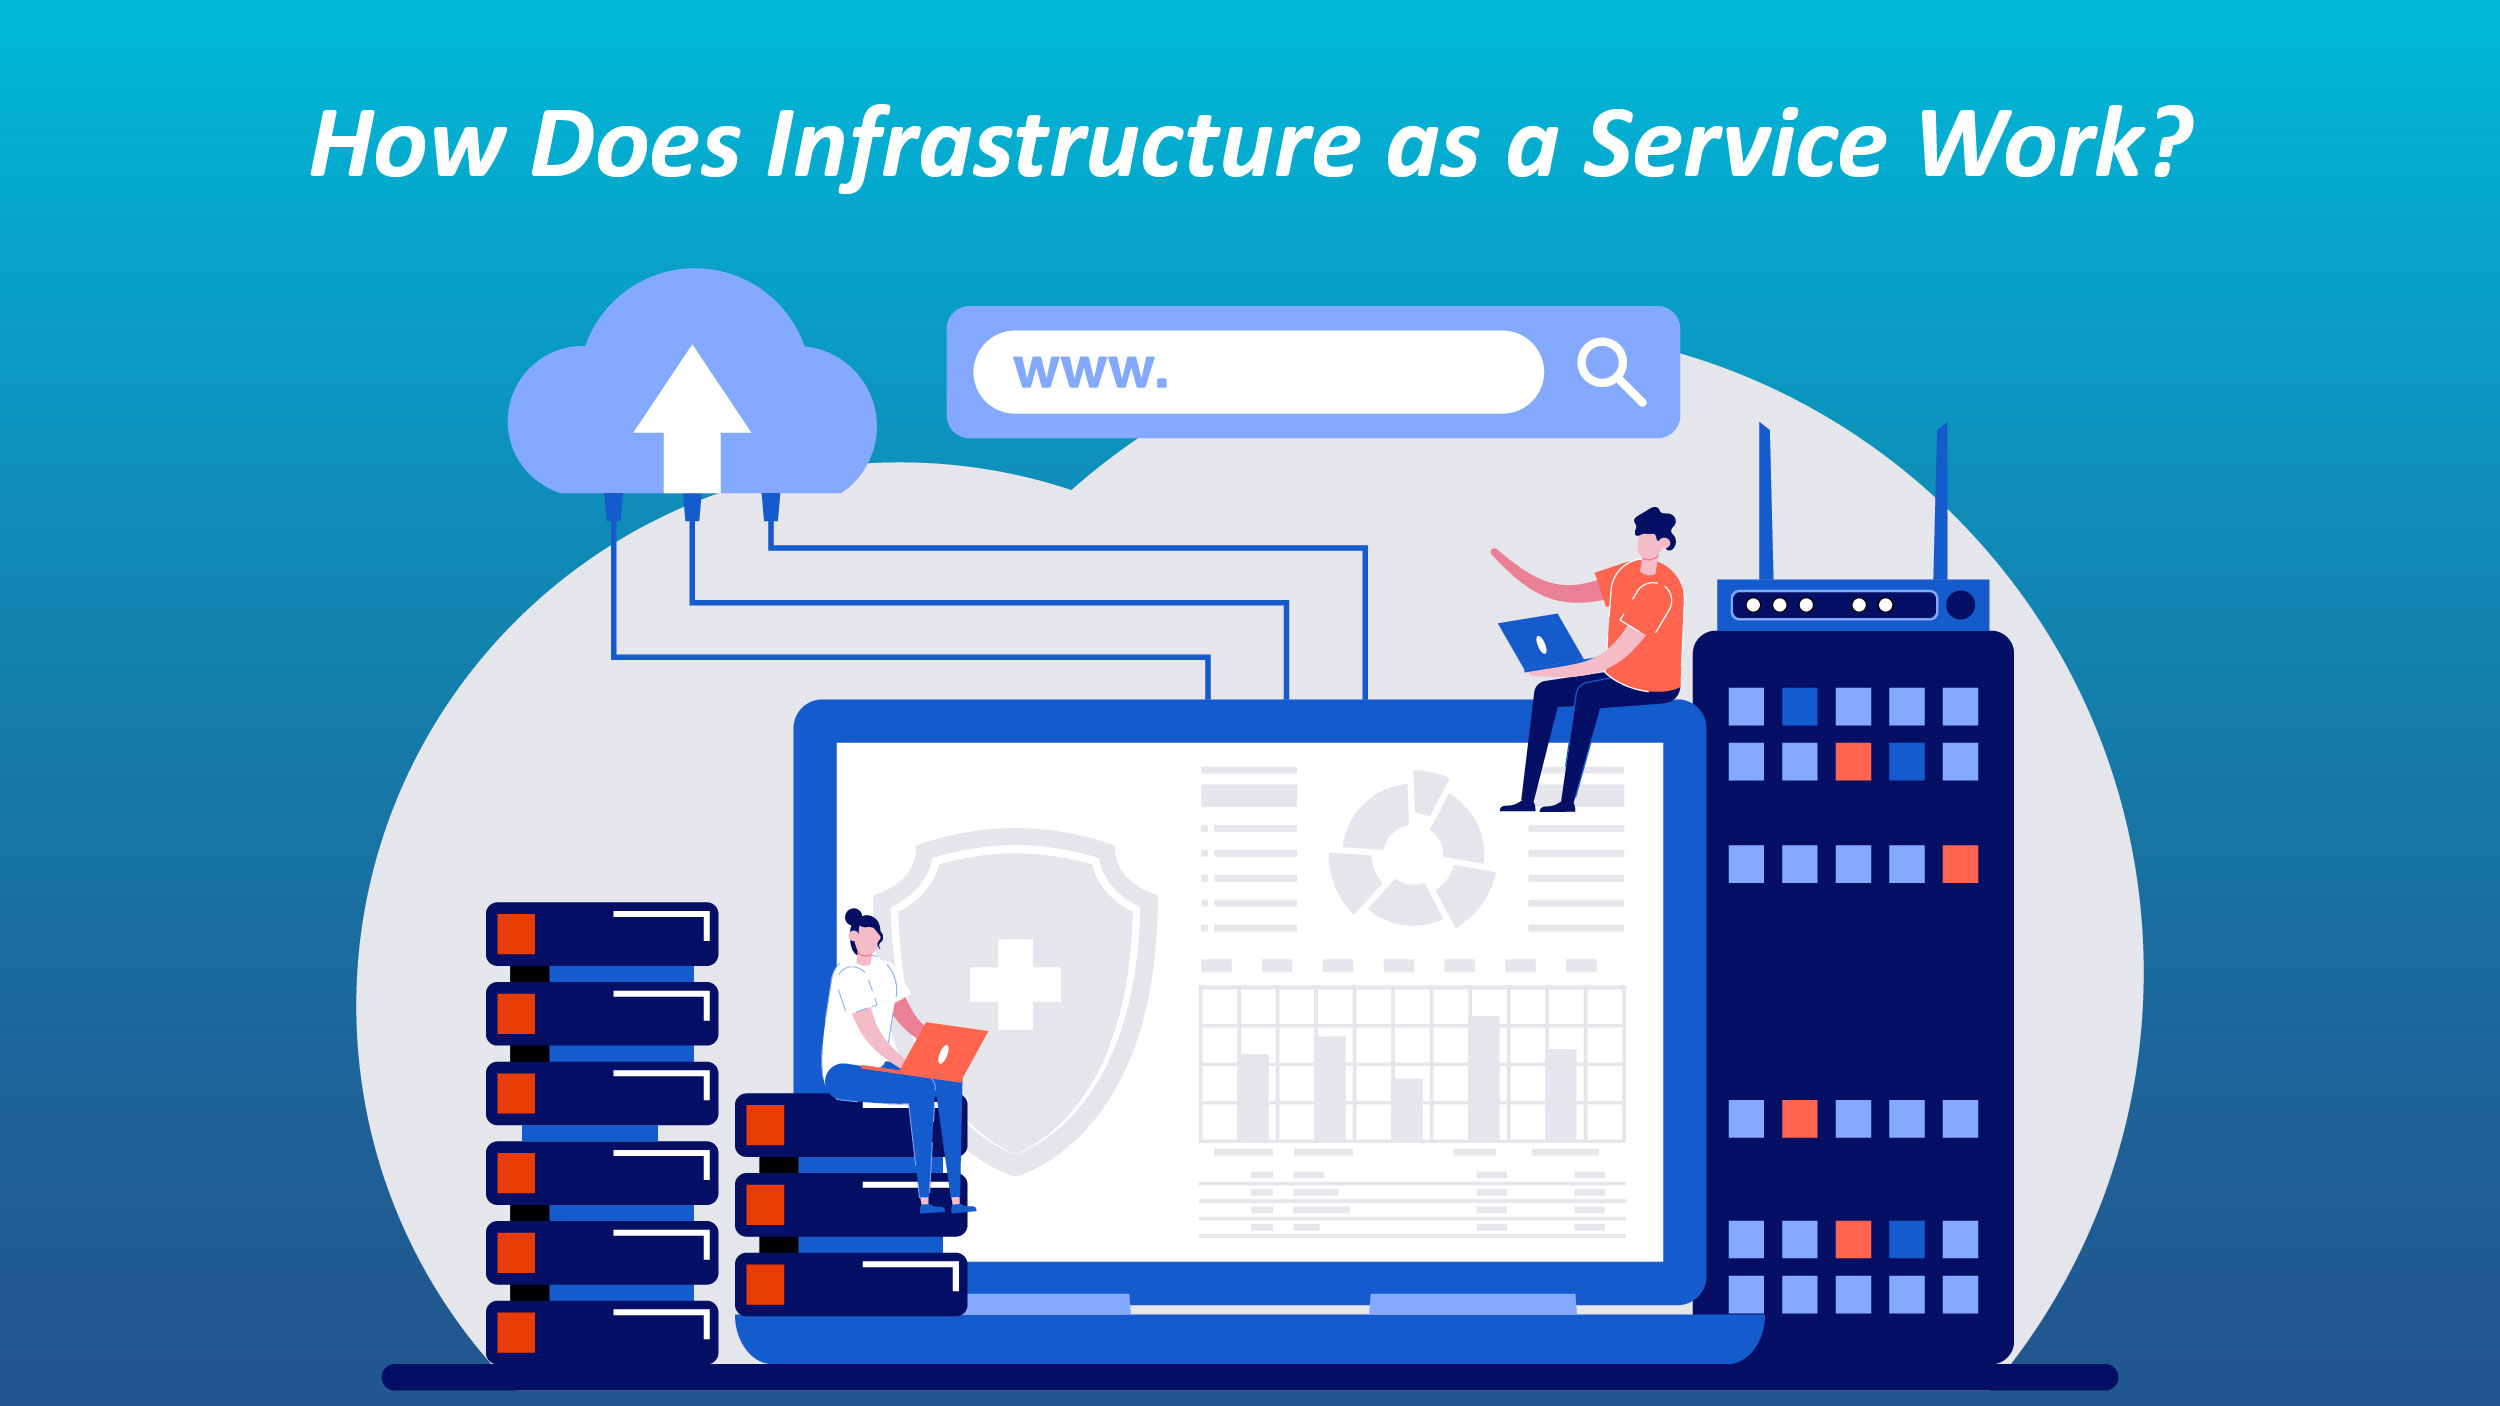 Infrastructure-as-a-Service